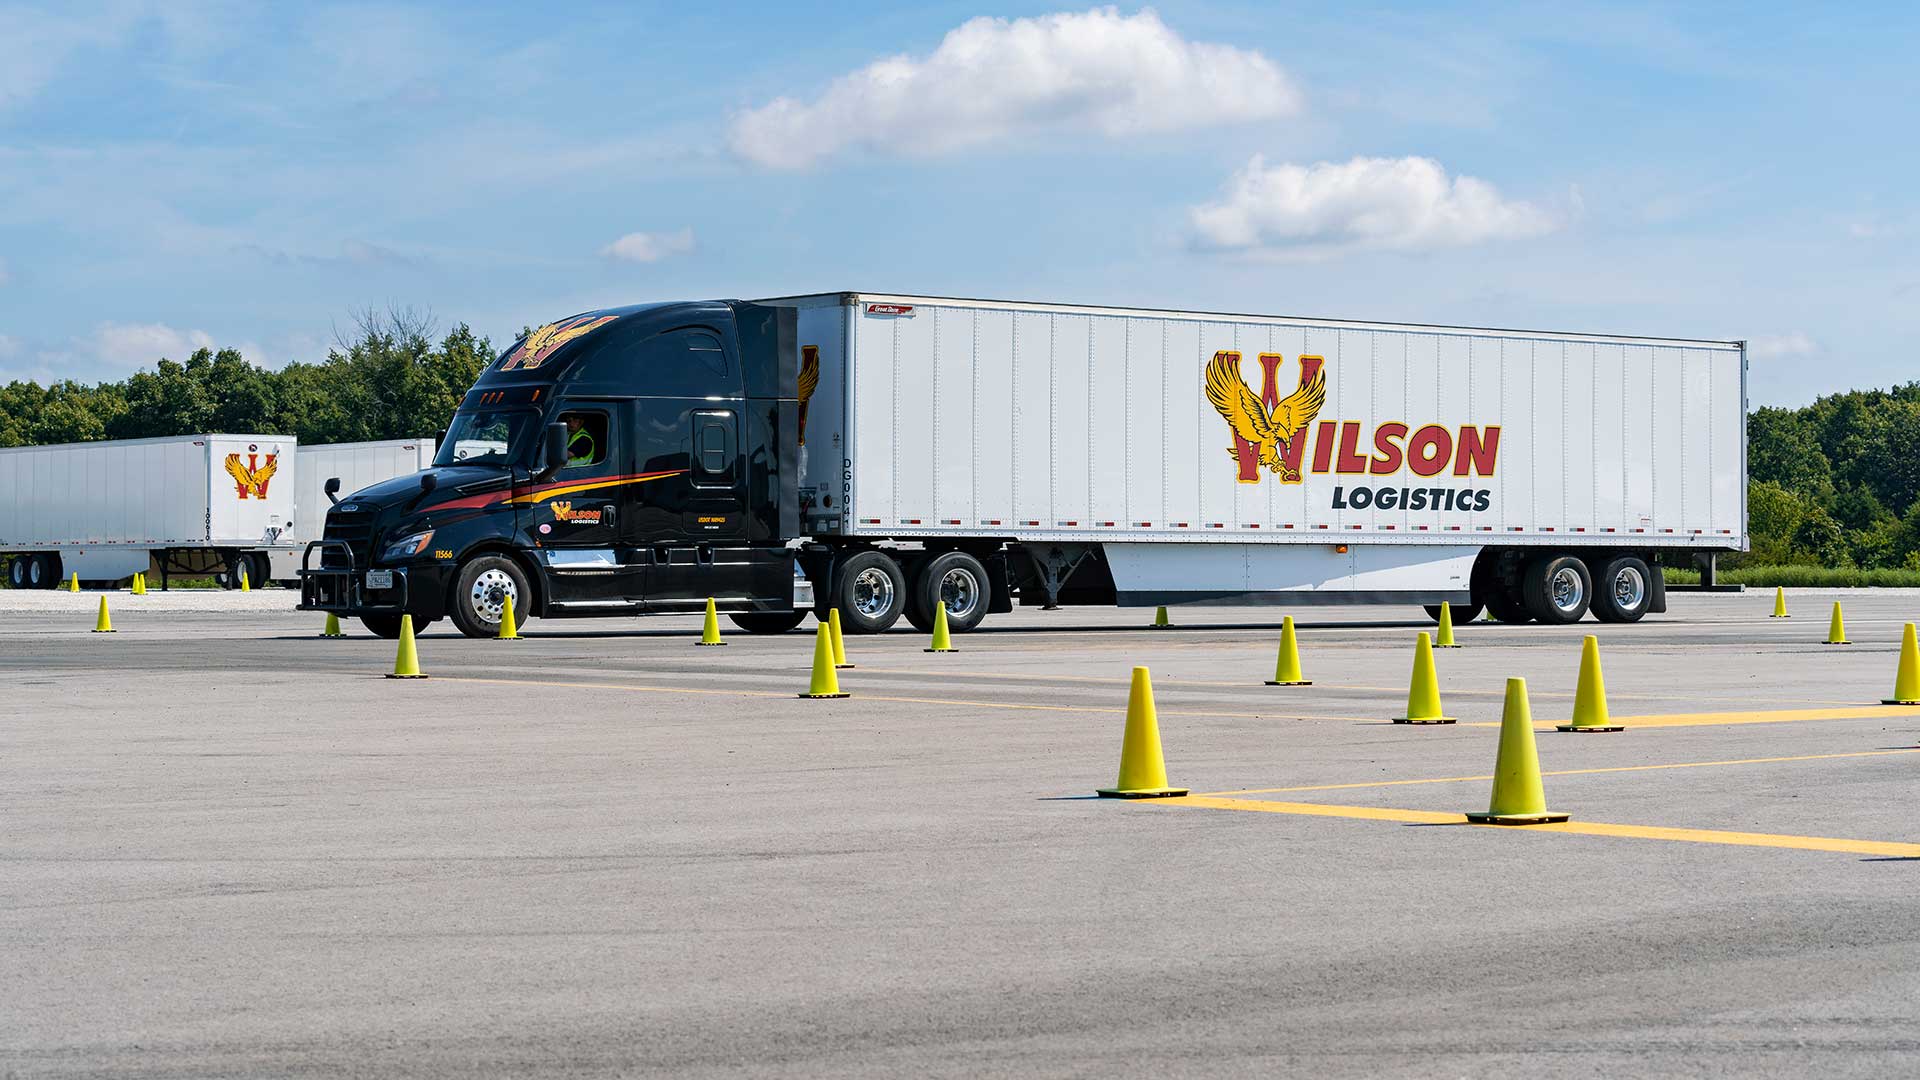 Wilson Logistics truck for paid cdl training